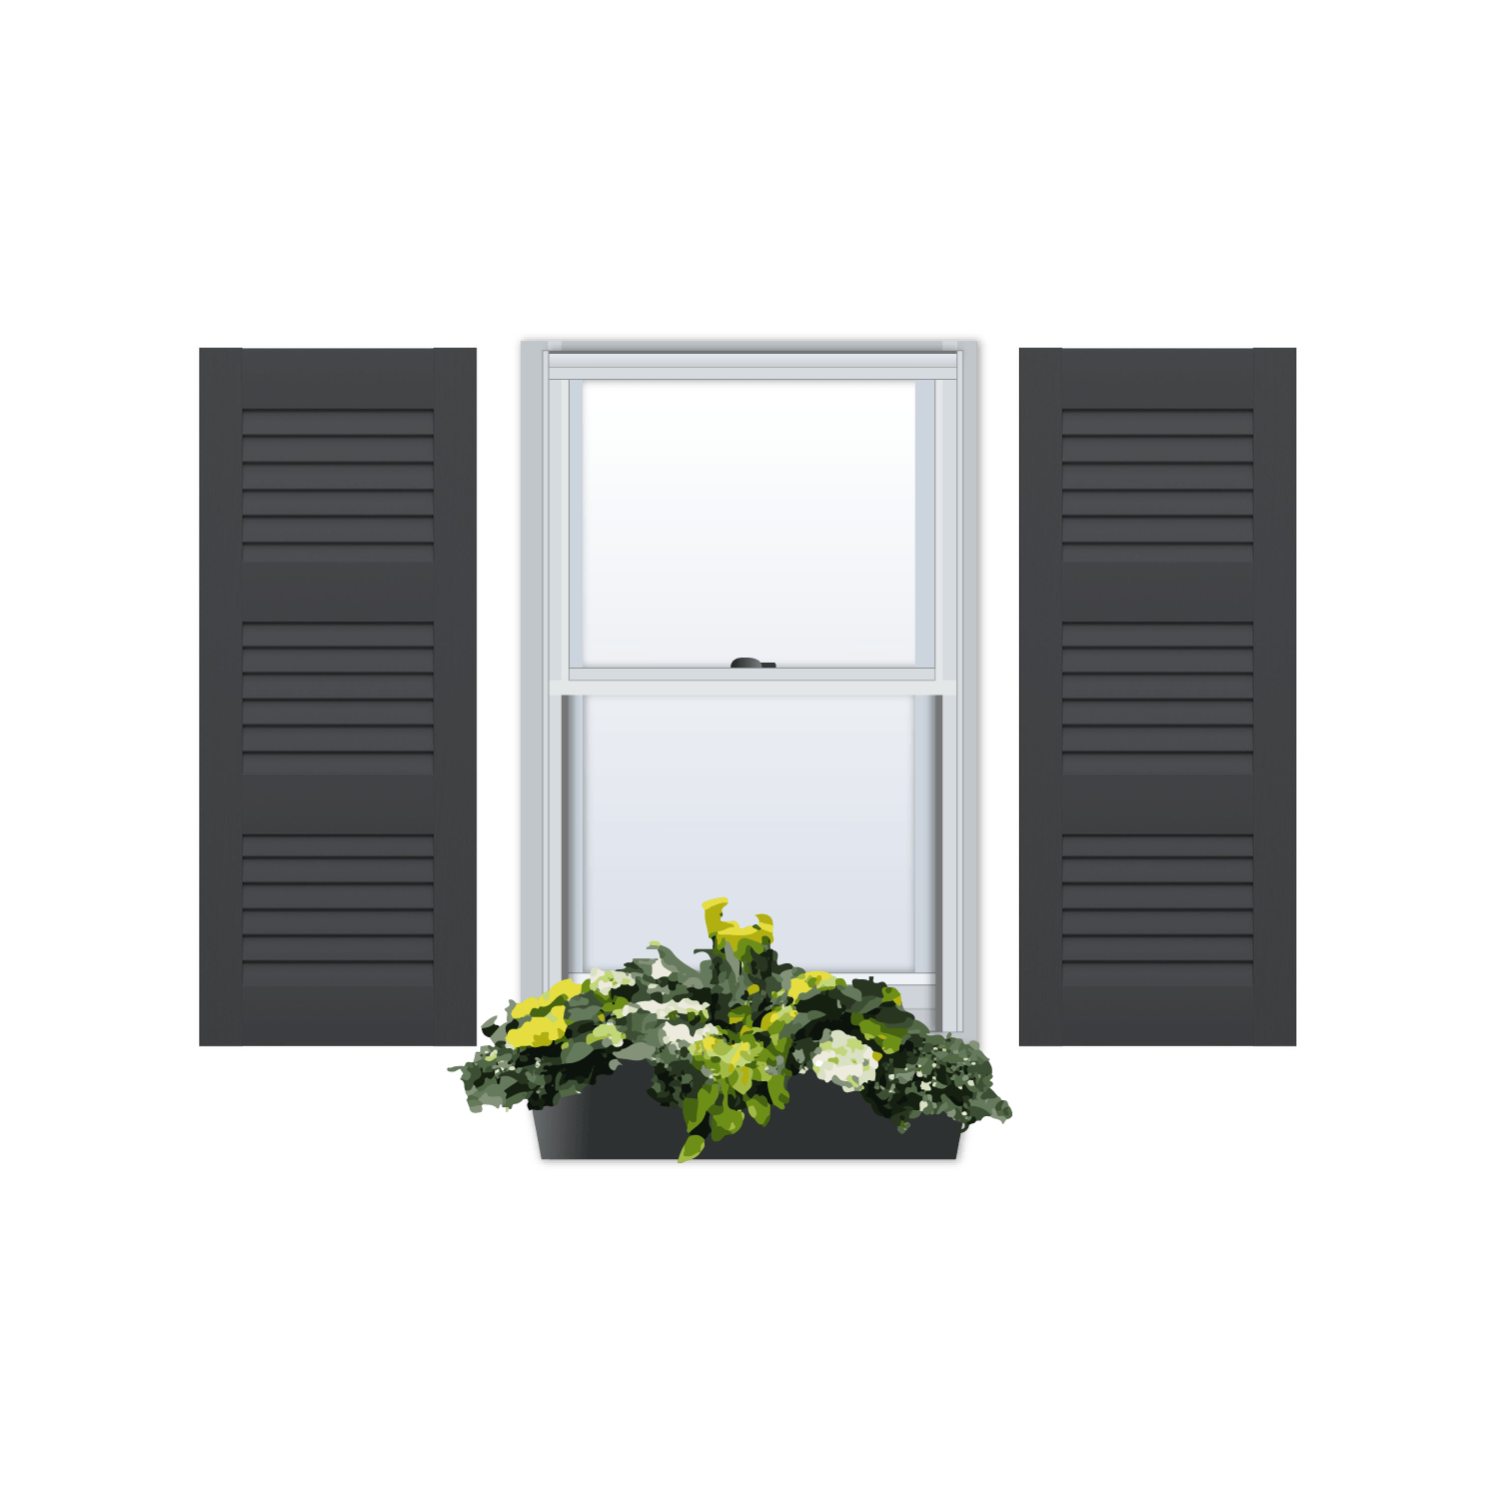 PVC | Louvered Exterior Shutters | Three Equal Sections | 1 Pair